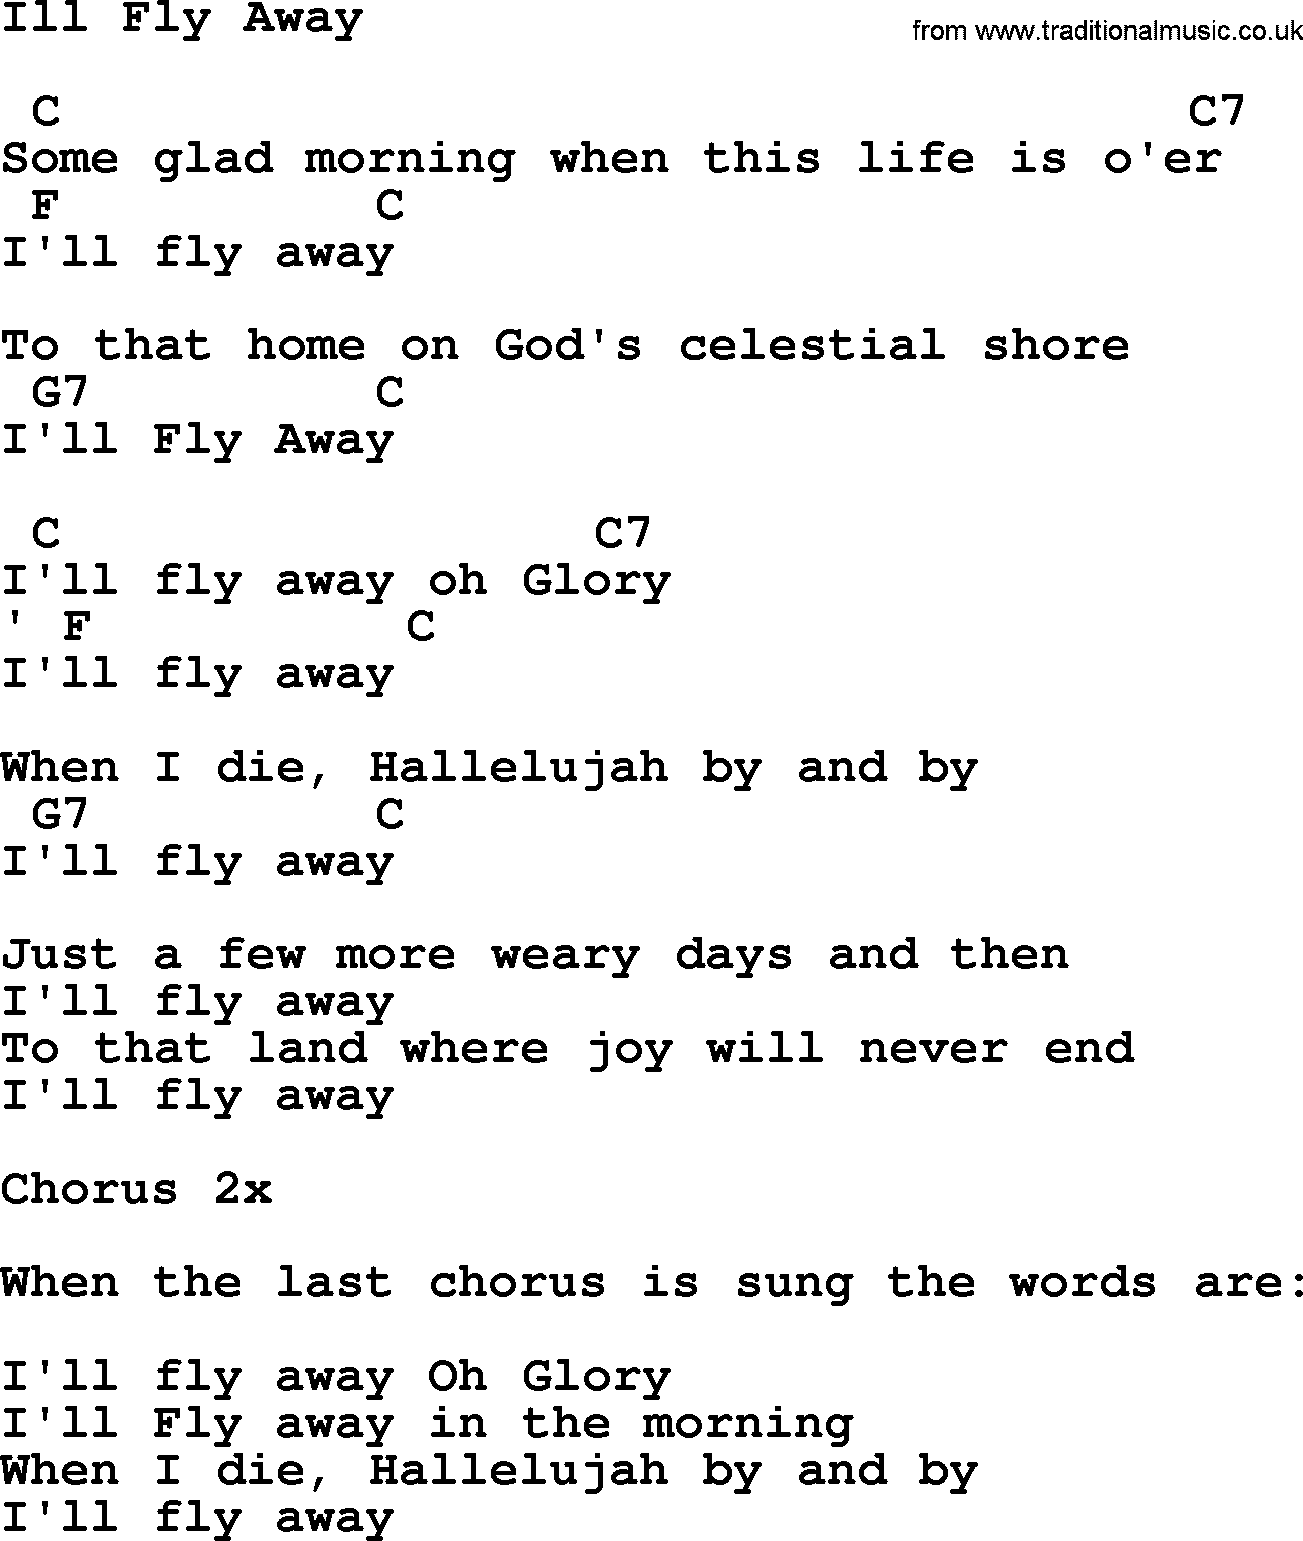 Johnny Cash song: Ill Fly Away, lyrics and chords.